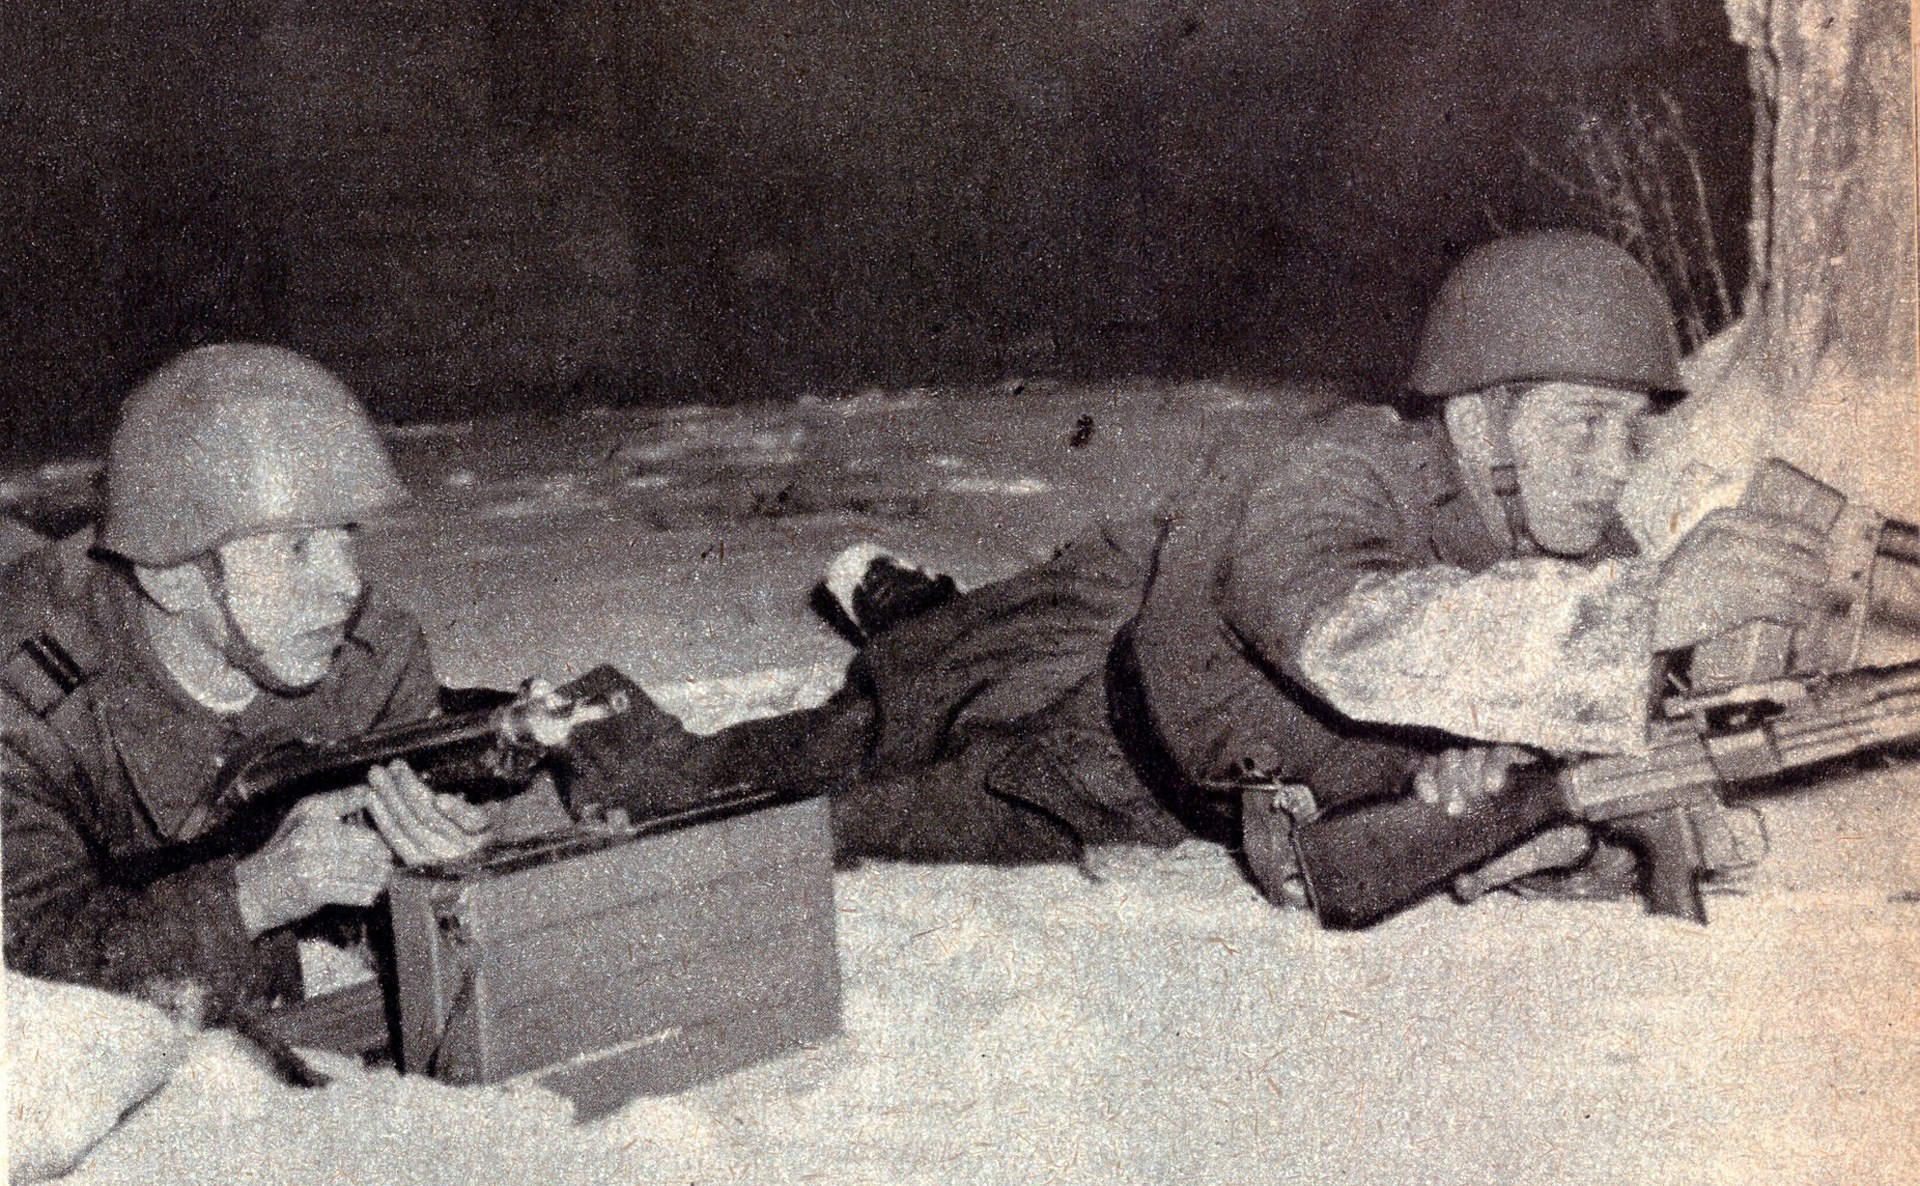 A Czech light machine gun team running a vz. 52 in 7.62×45 mm. The gunner (right) is inserting a magazine, and the assistant gunner (left) has positioned the magazine carrying box for the vz. 52 in the snow in front of him. He is armed with the Sa 23 (vz. 48a) submachine gun.